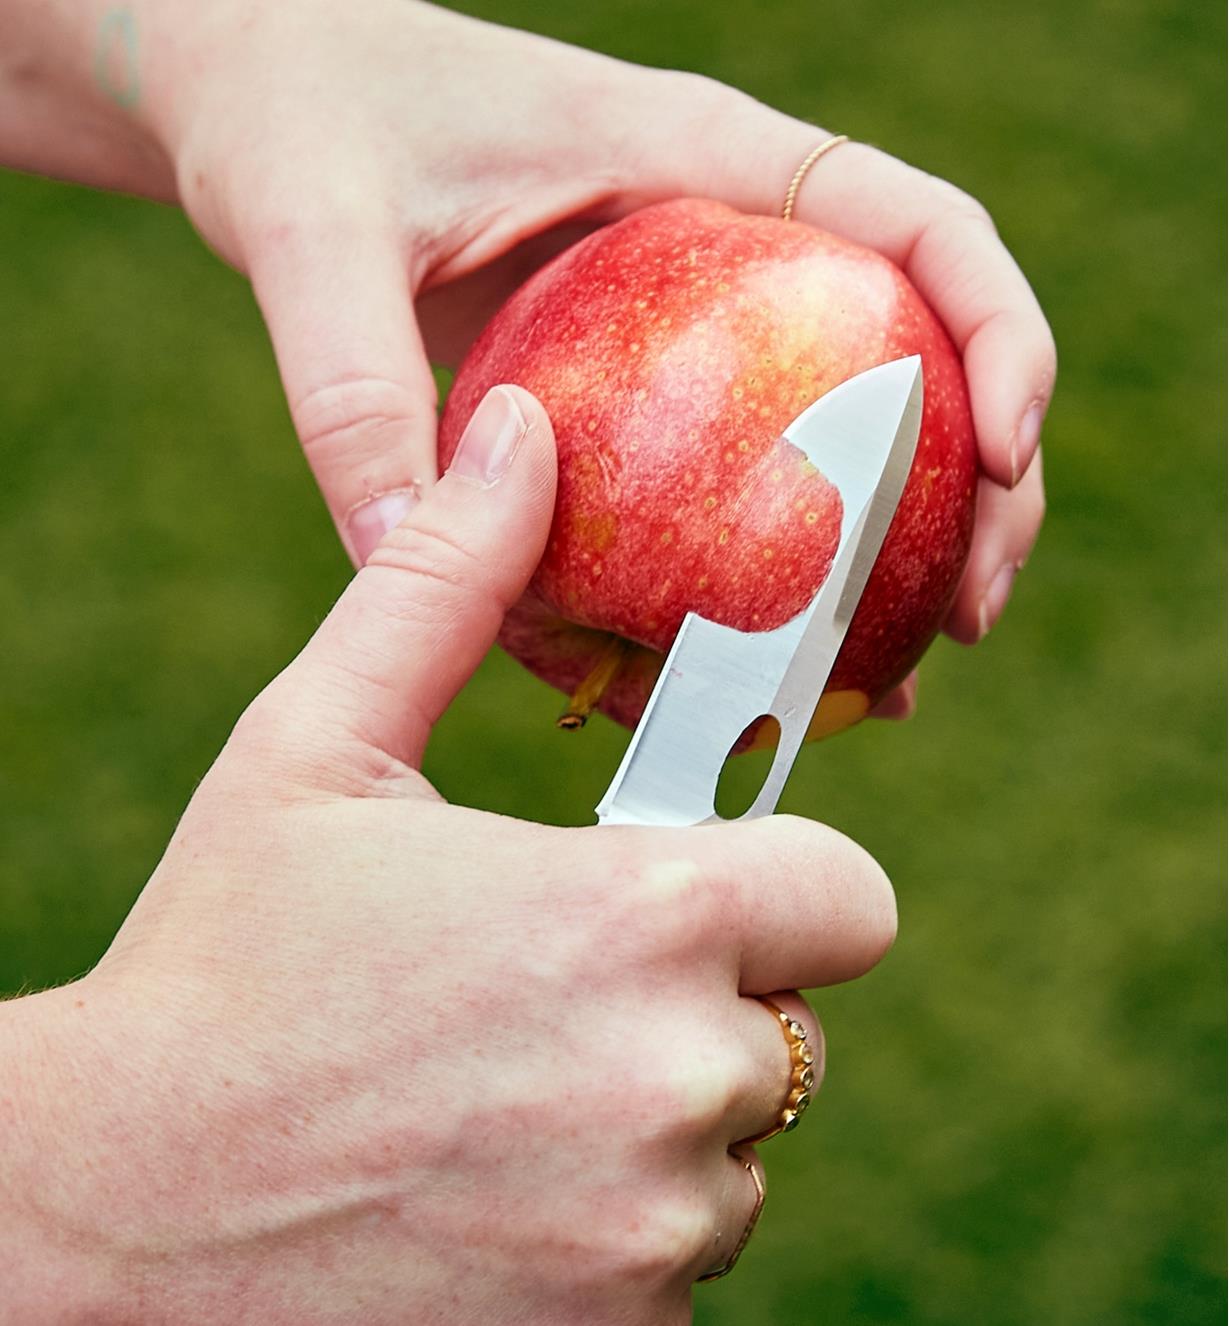 Using the 3-in-1 knife with the 3"" drop-point blade to cut an apple